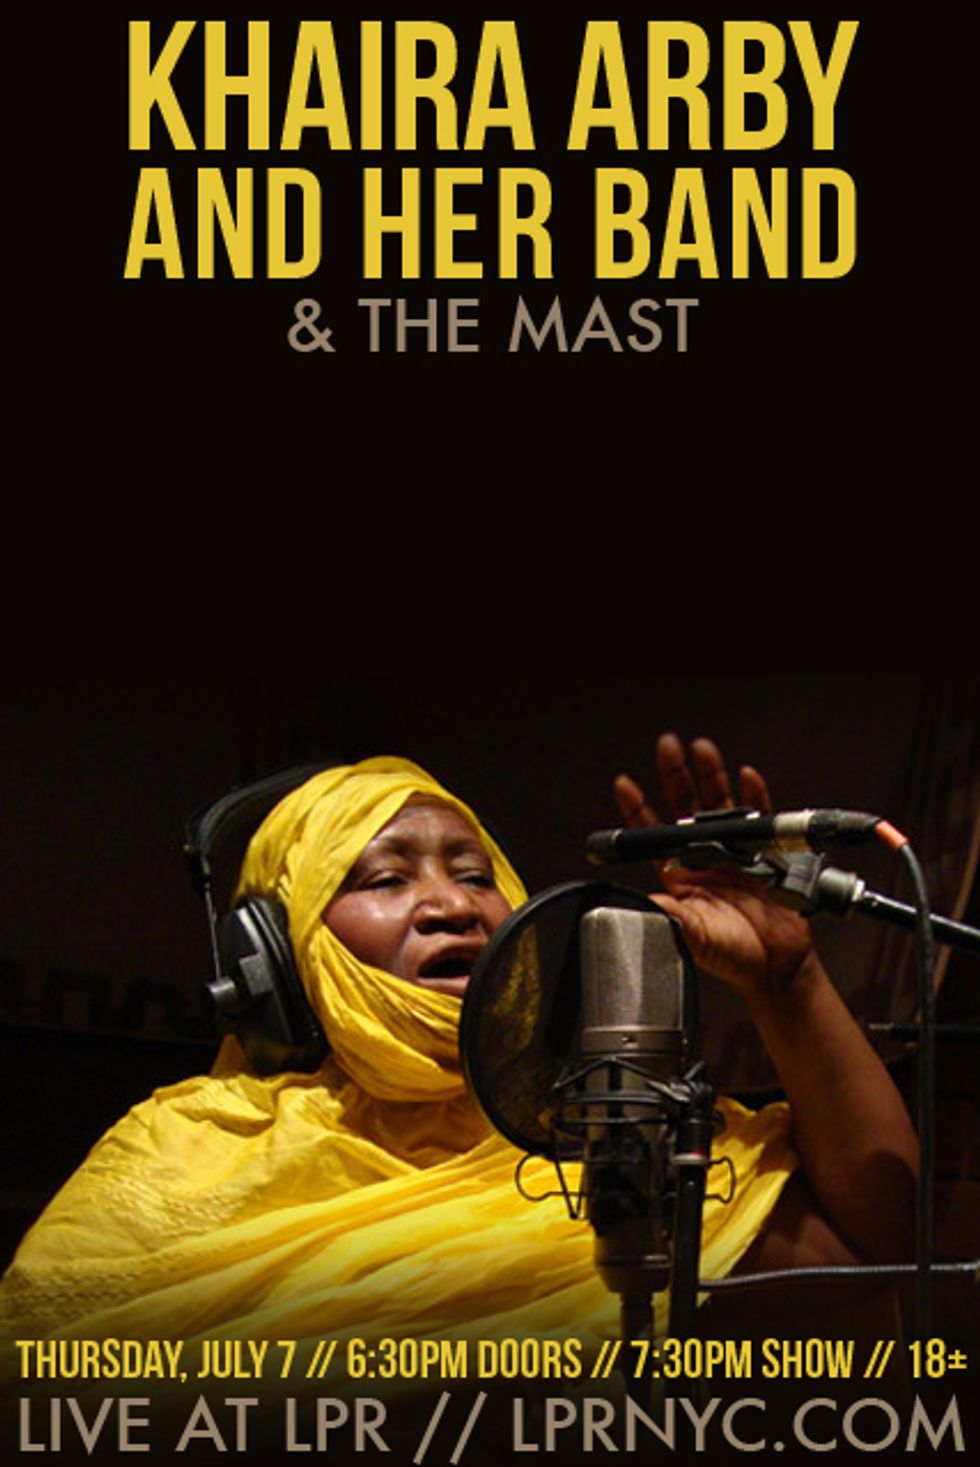 NYC: Khaira Arby and her Band - Thursday, July 7th